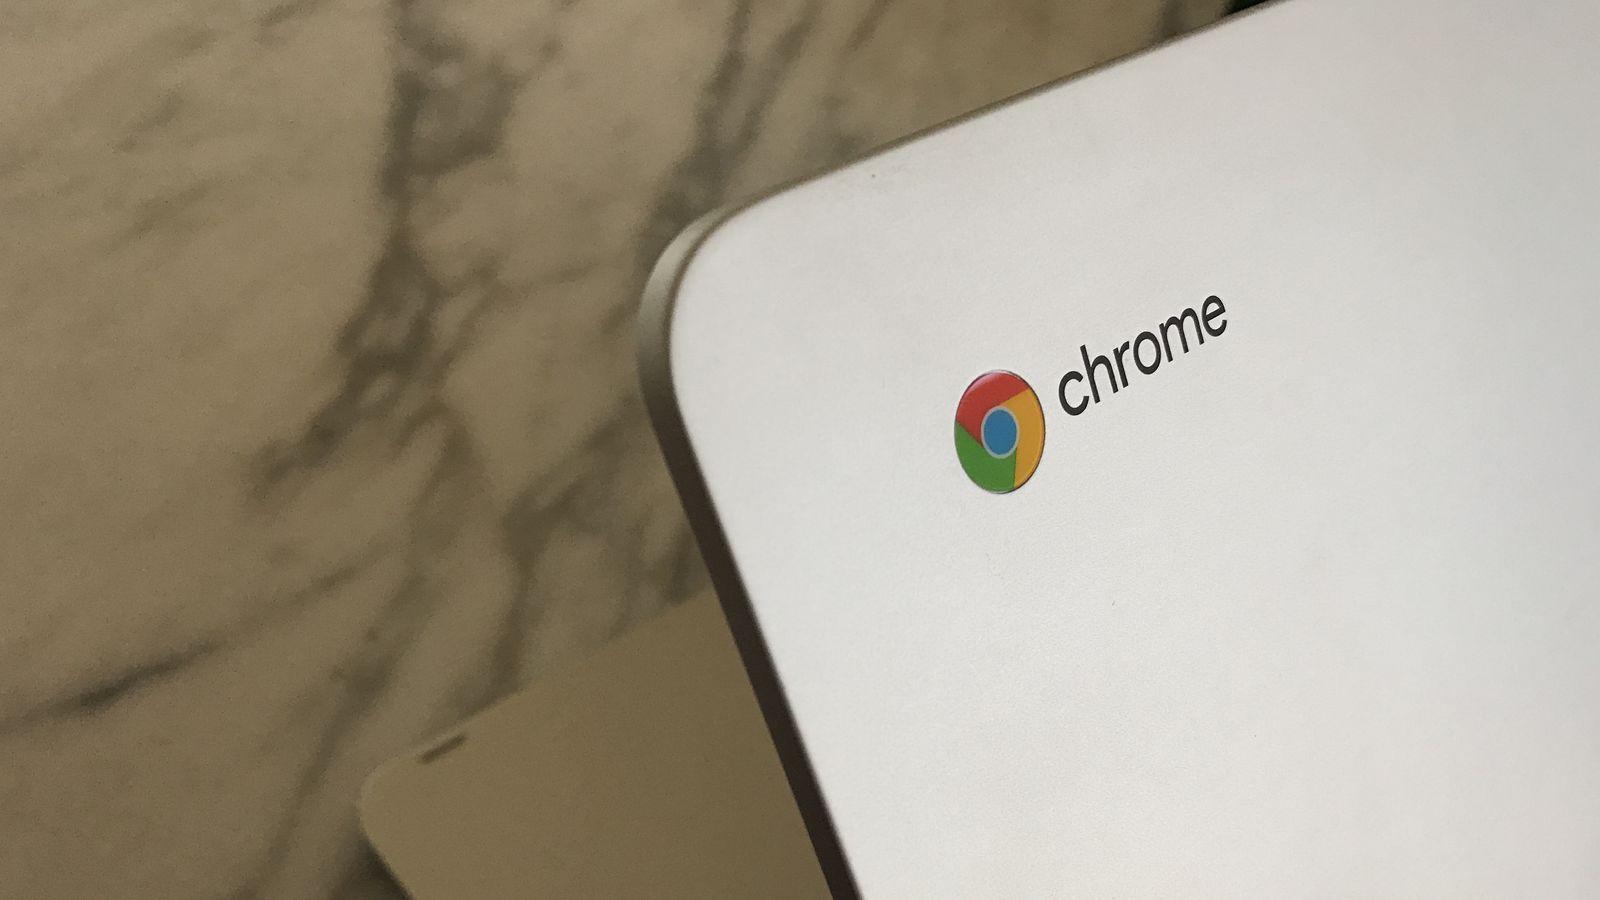 Google Chromebook Logo - How to use a Chromebook: Tips, tricks and shortcuts - CNET